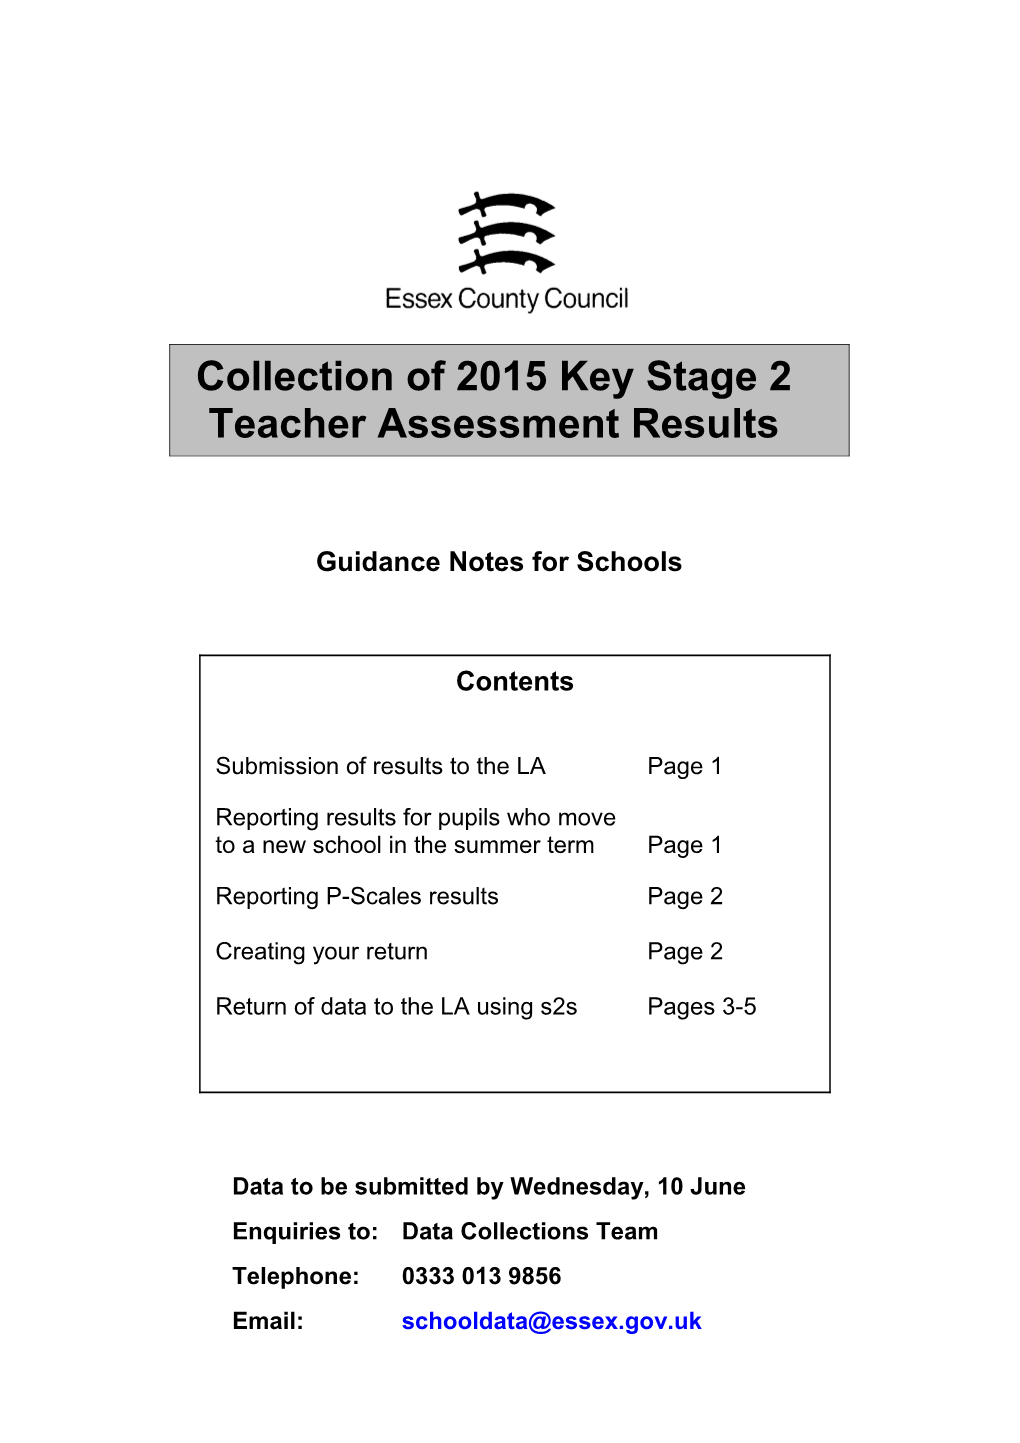 Guidance Notes for Schools